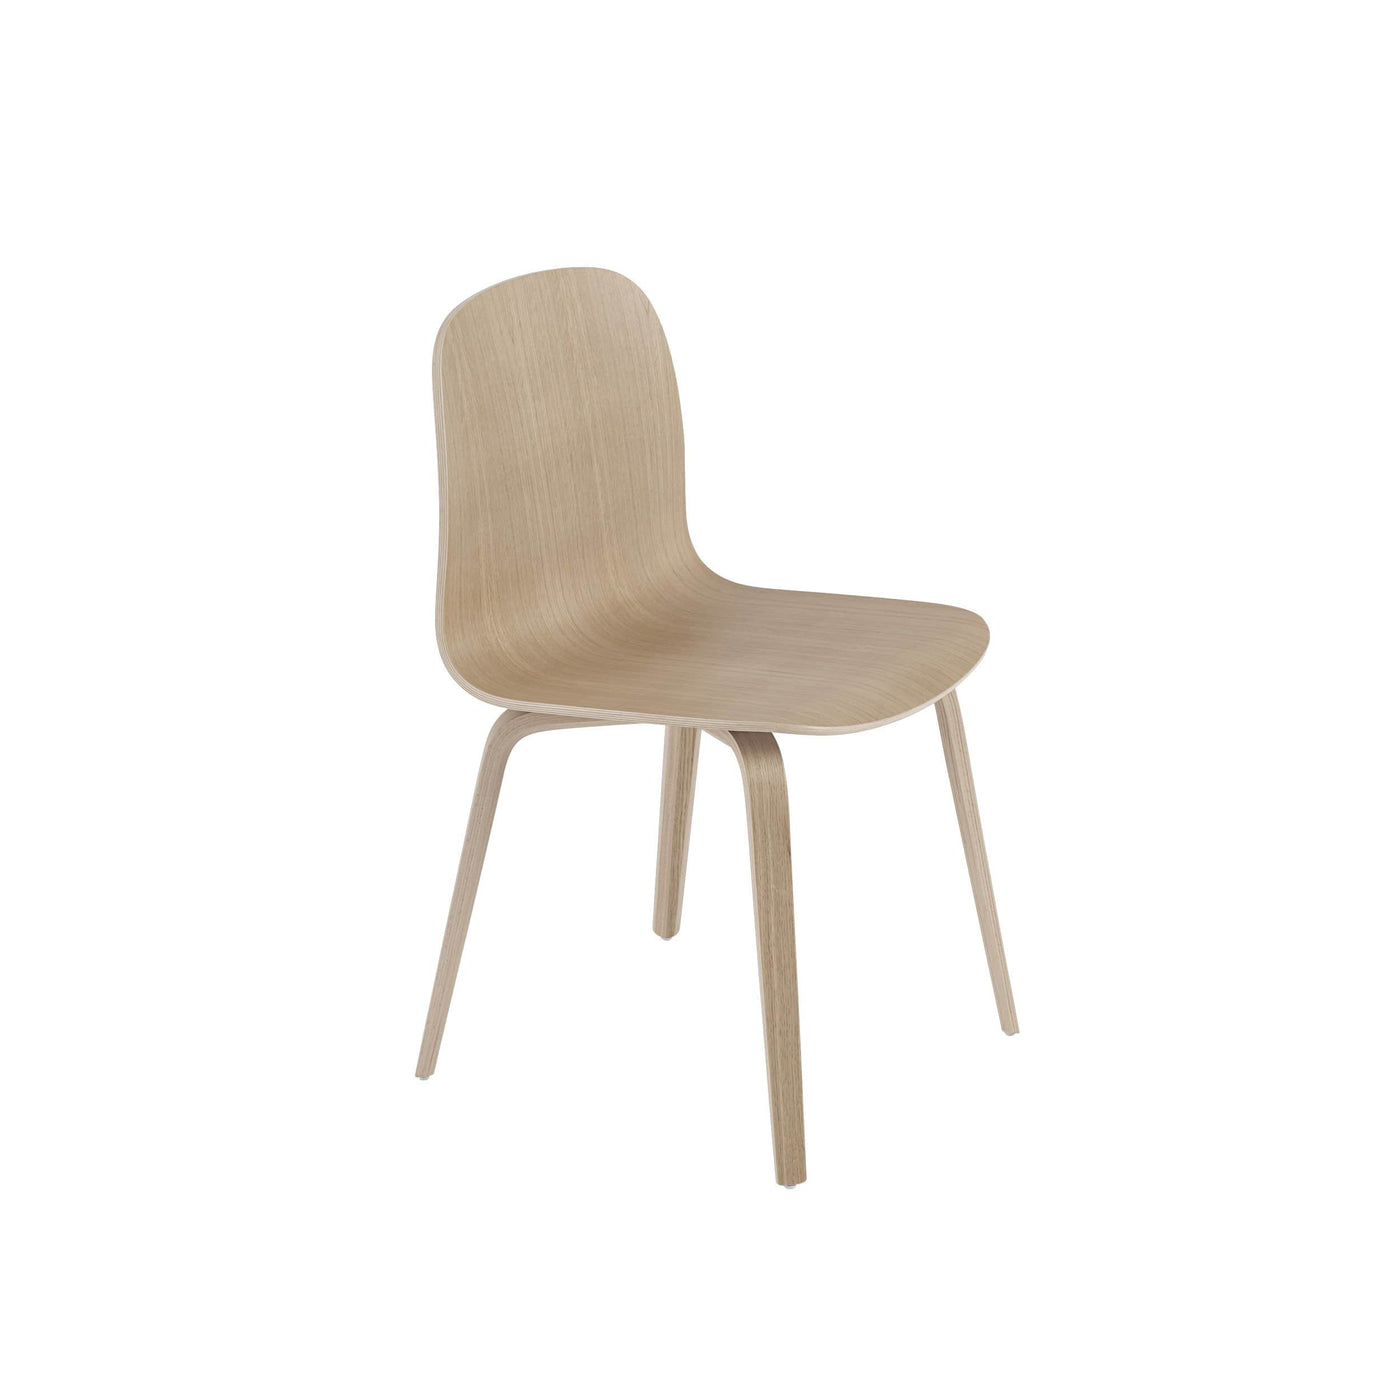 Muuto Visu chair wood base in oak. A modern dining chair available to buy from someday designs . #colour_oak